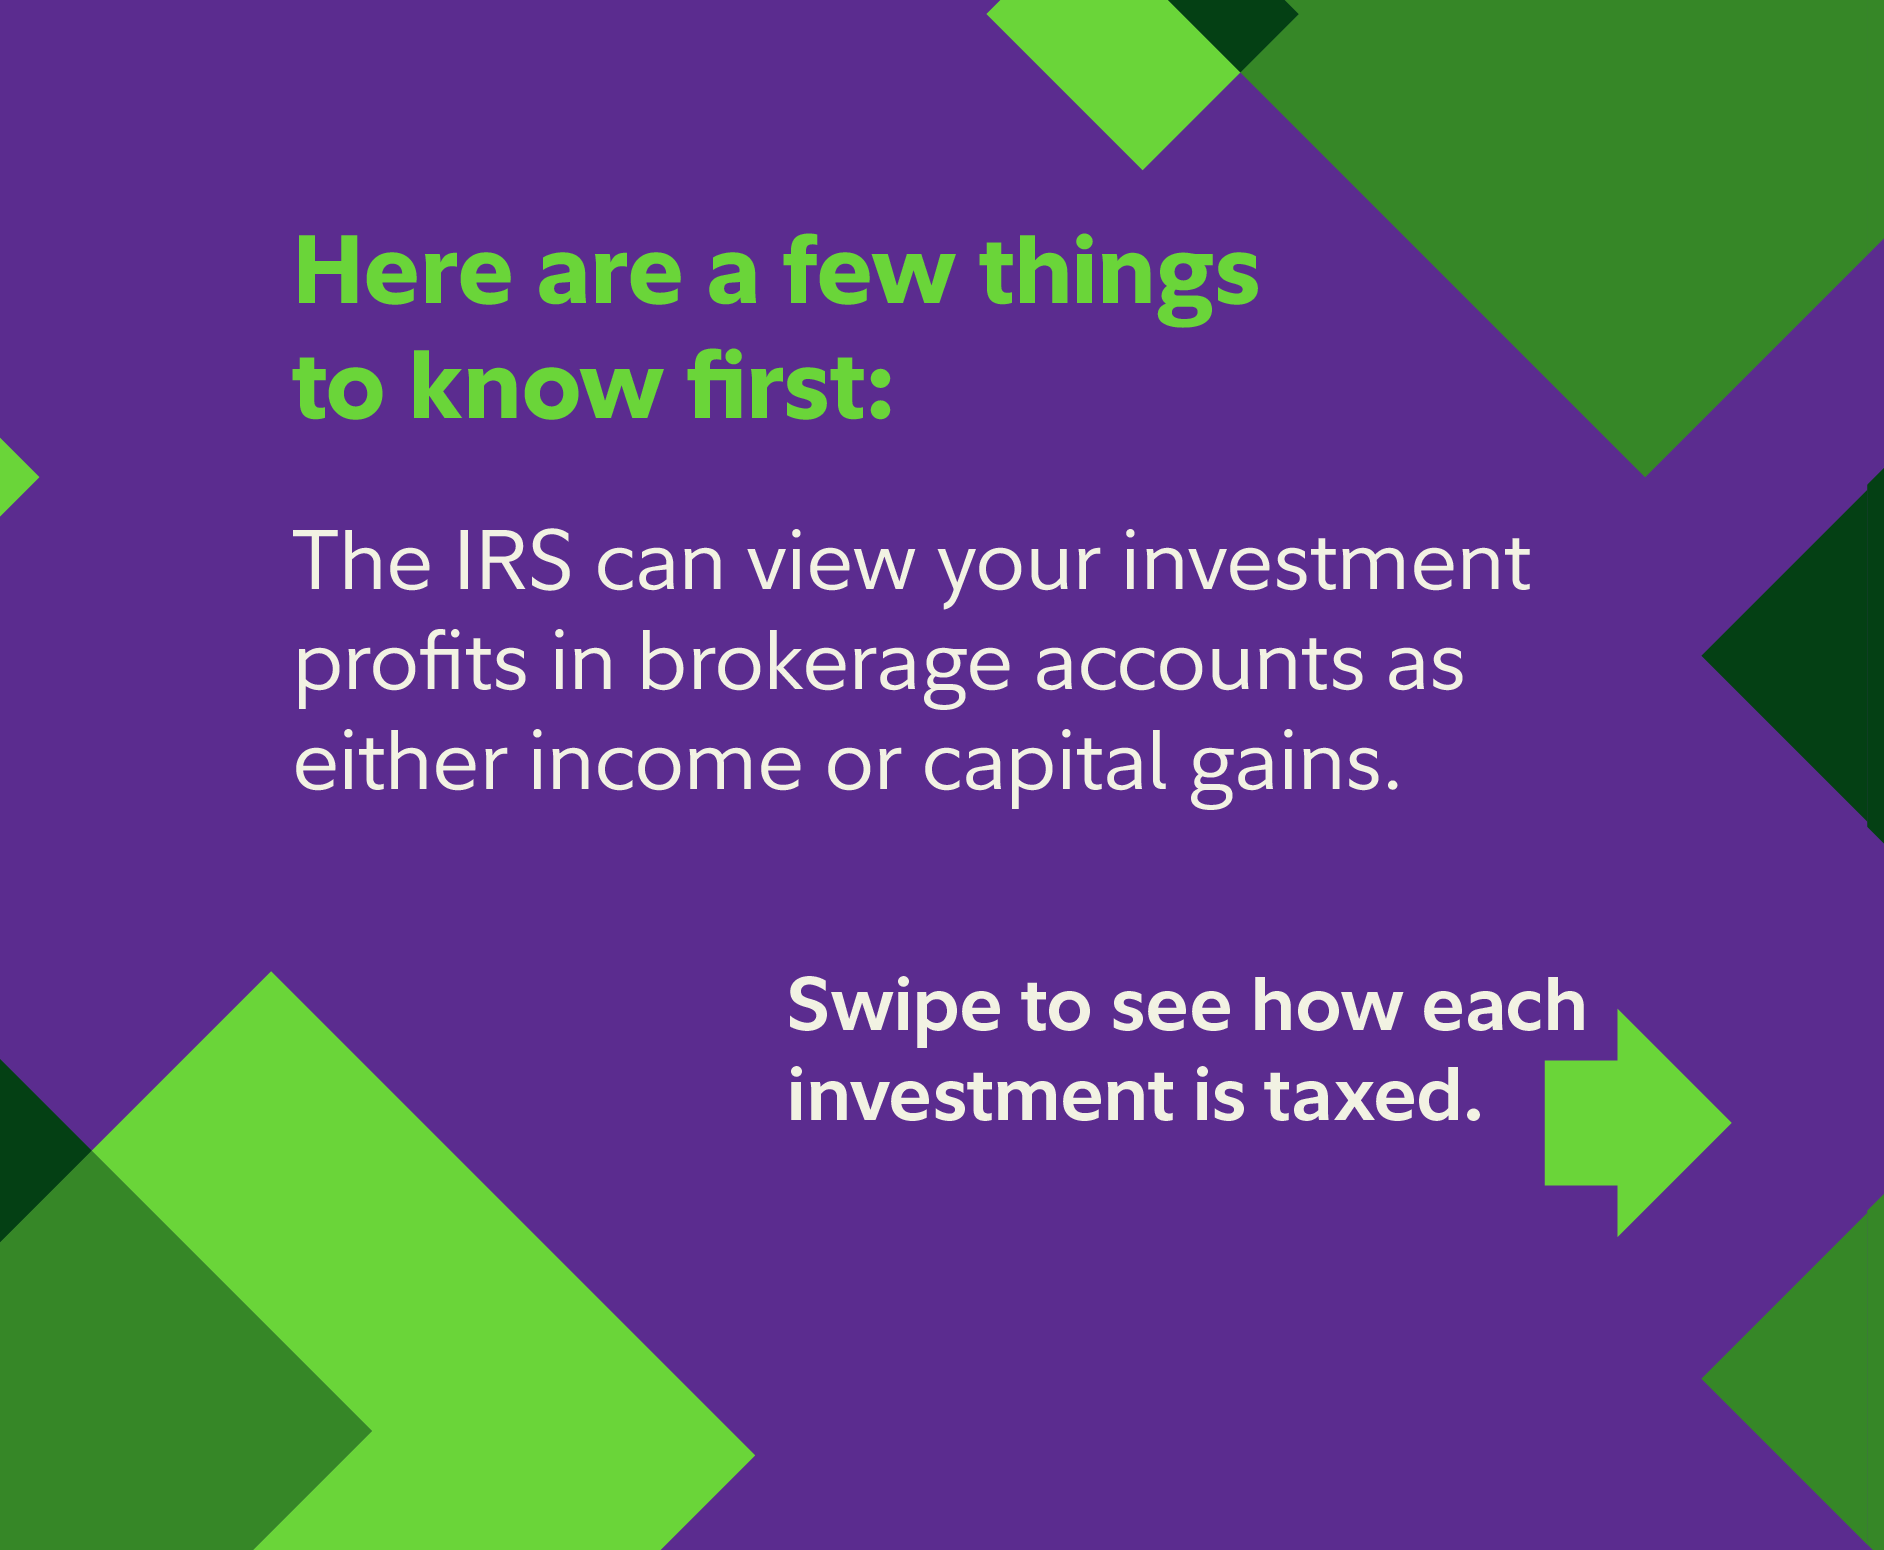 how-investment-are-taxed-02